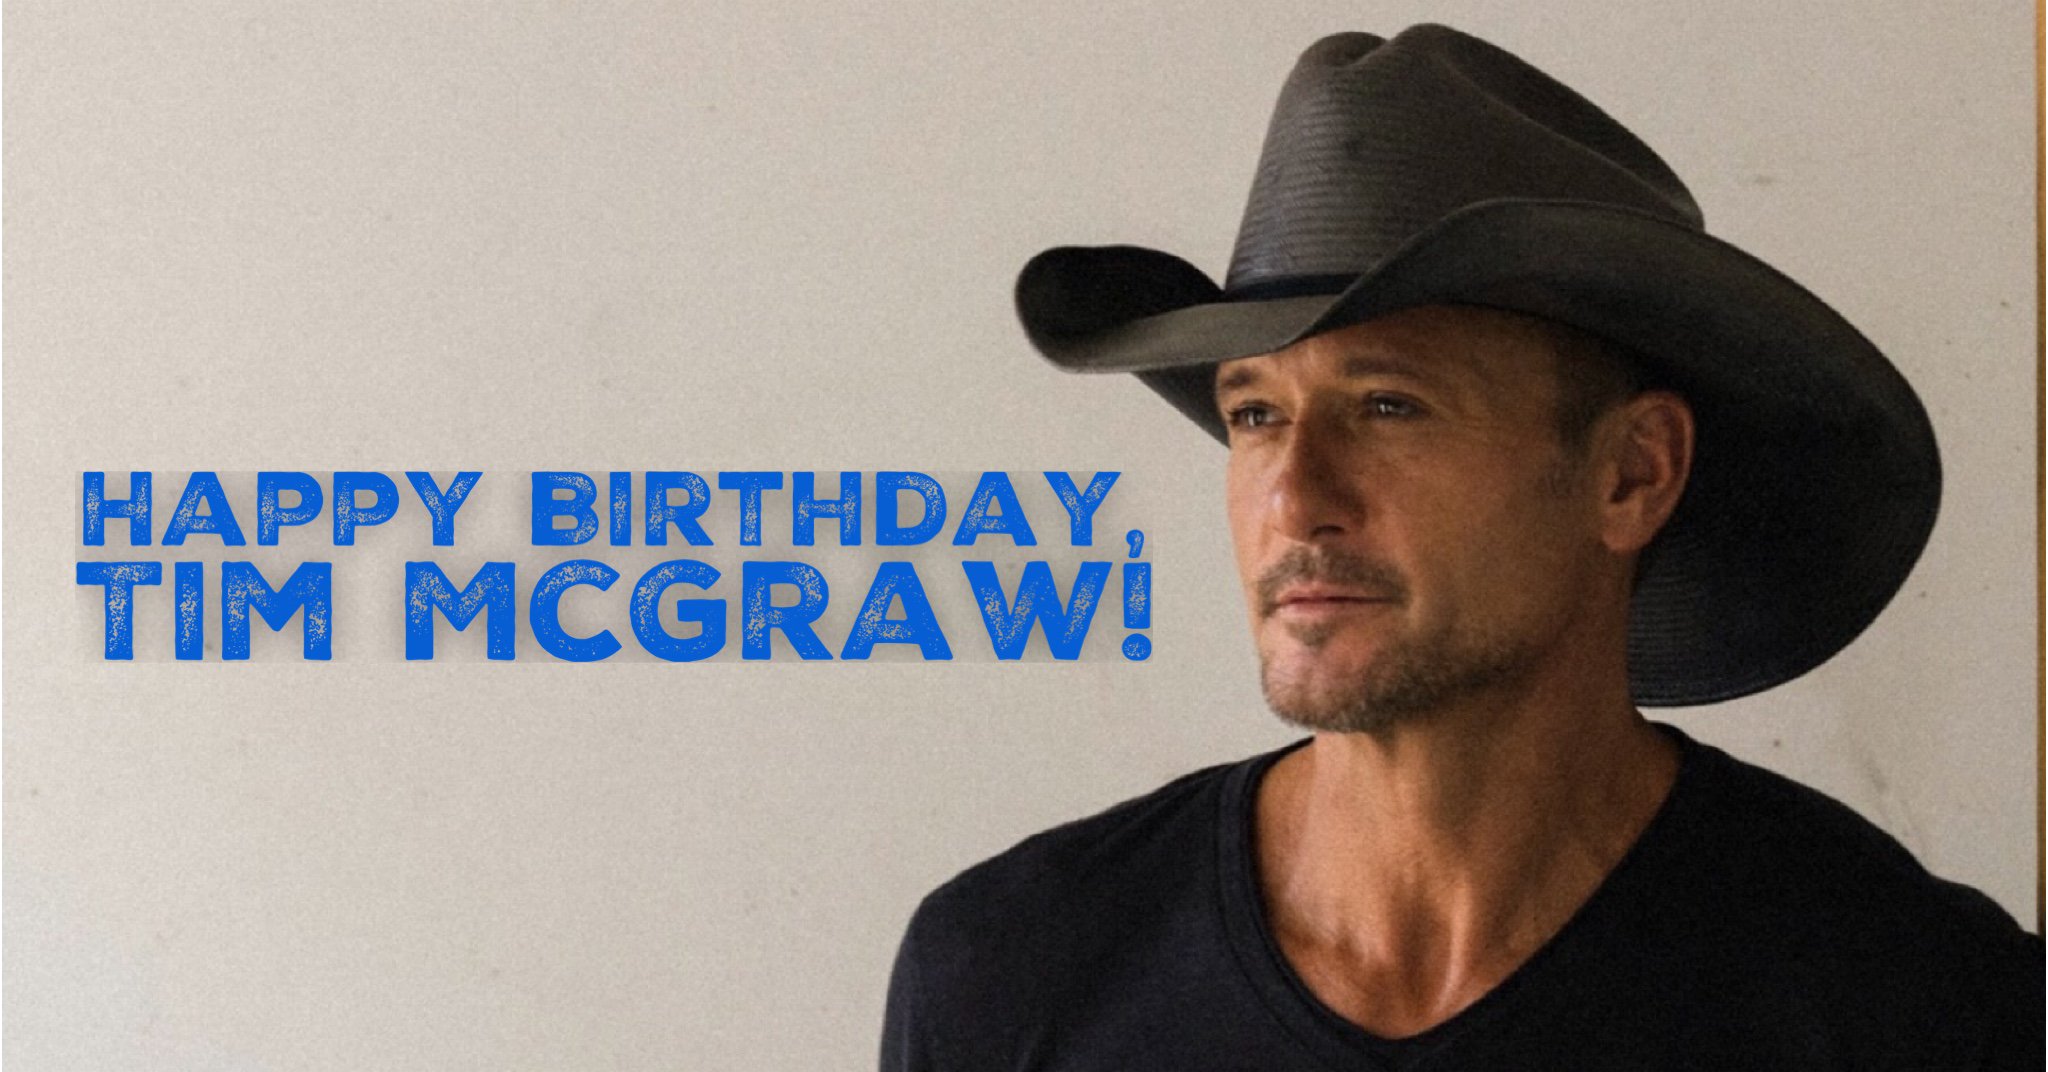 Happy 51st Birthday to Tim McGraw! What s your favorite of his many country hits?  